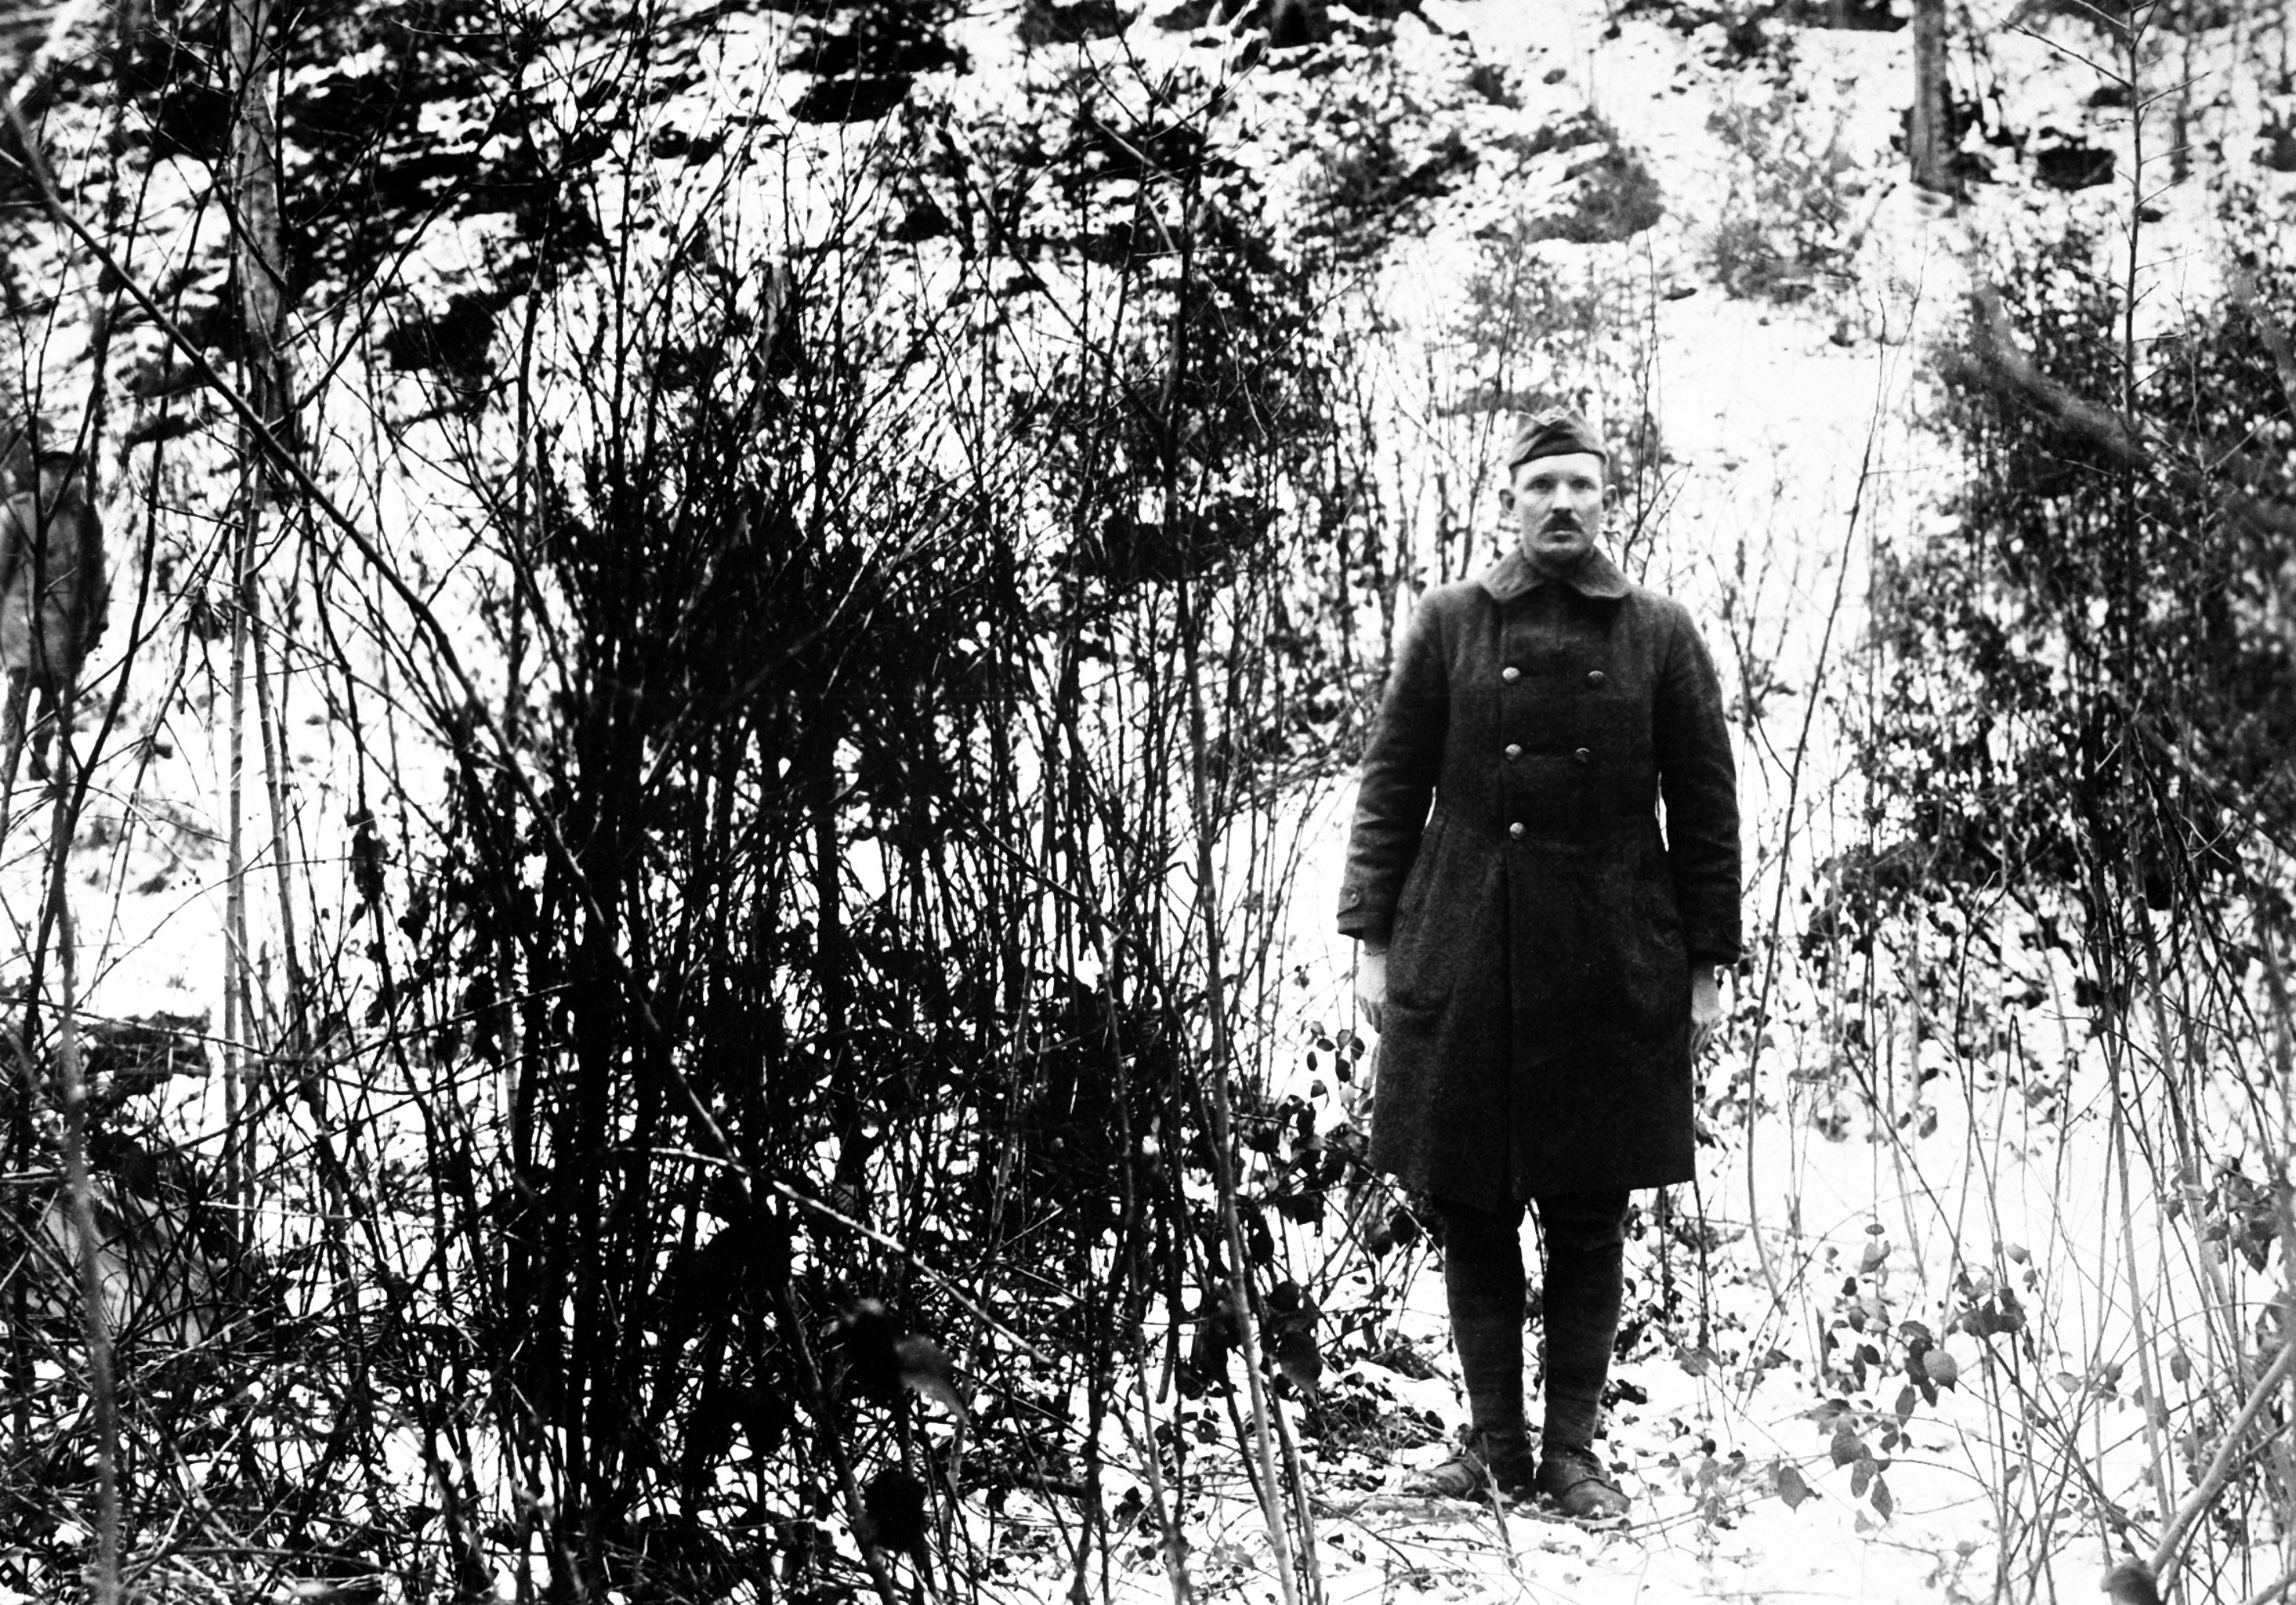 Sgt. Alvin York stands on the hill on which his heroic actions took place.